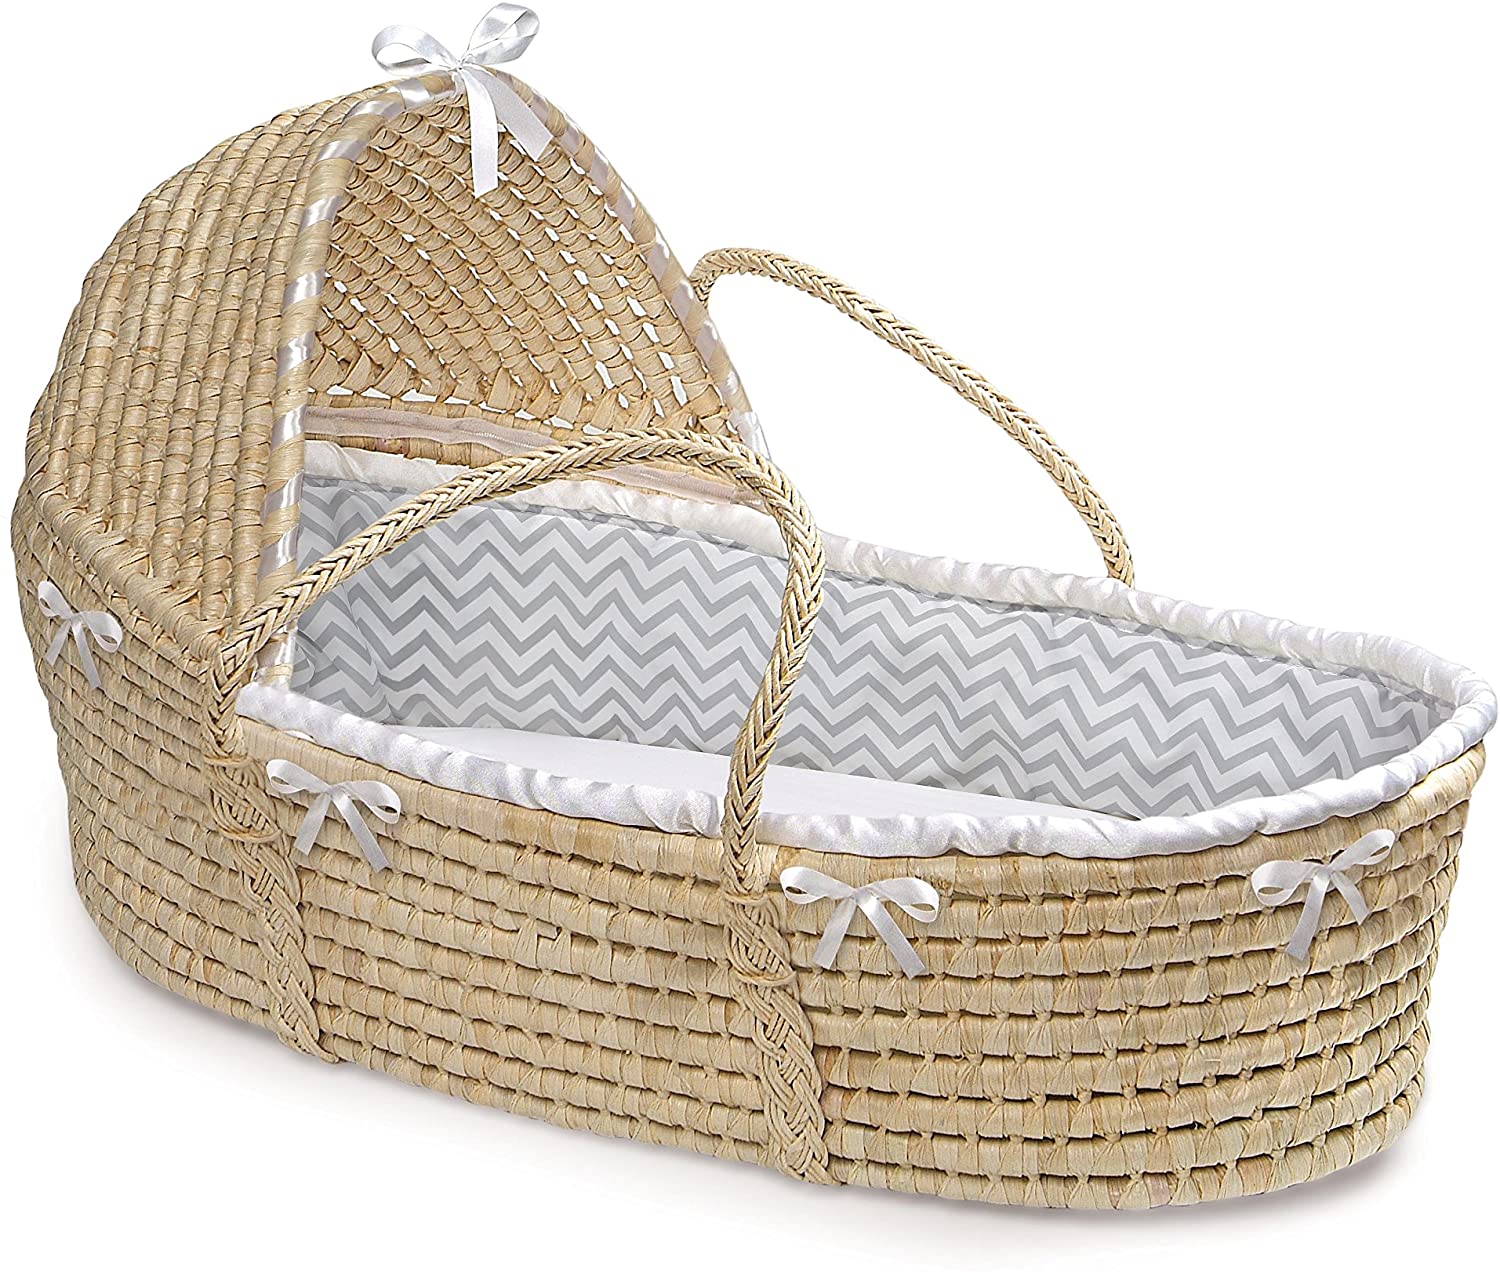 baby Moses Basket